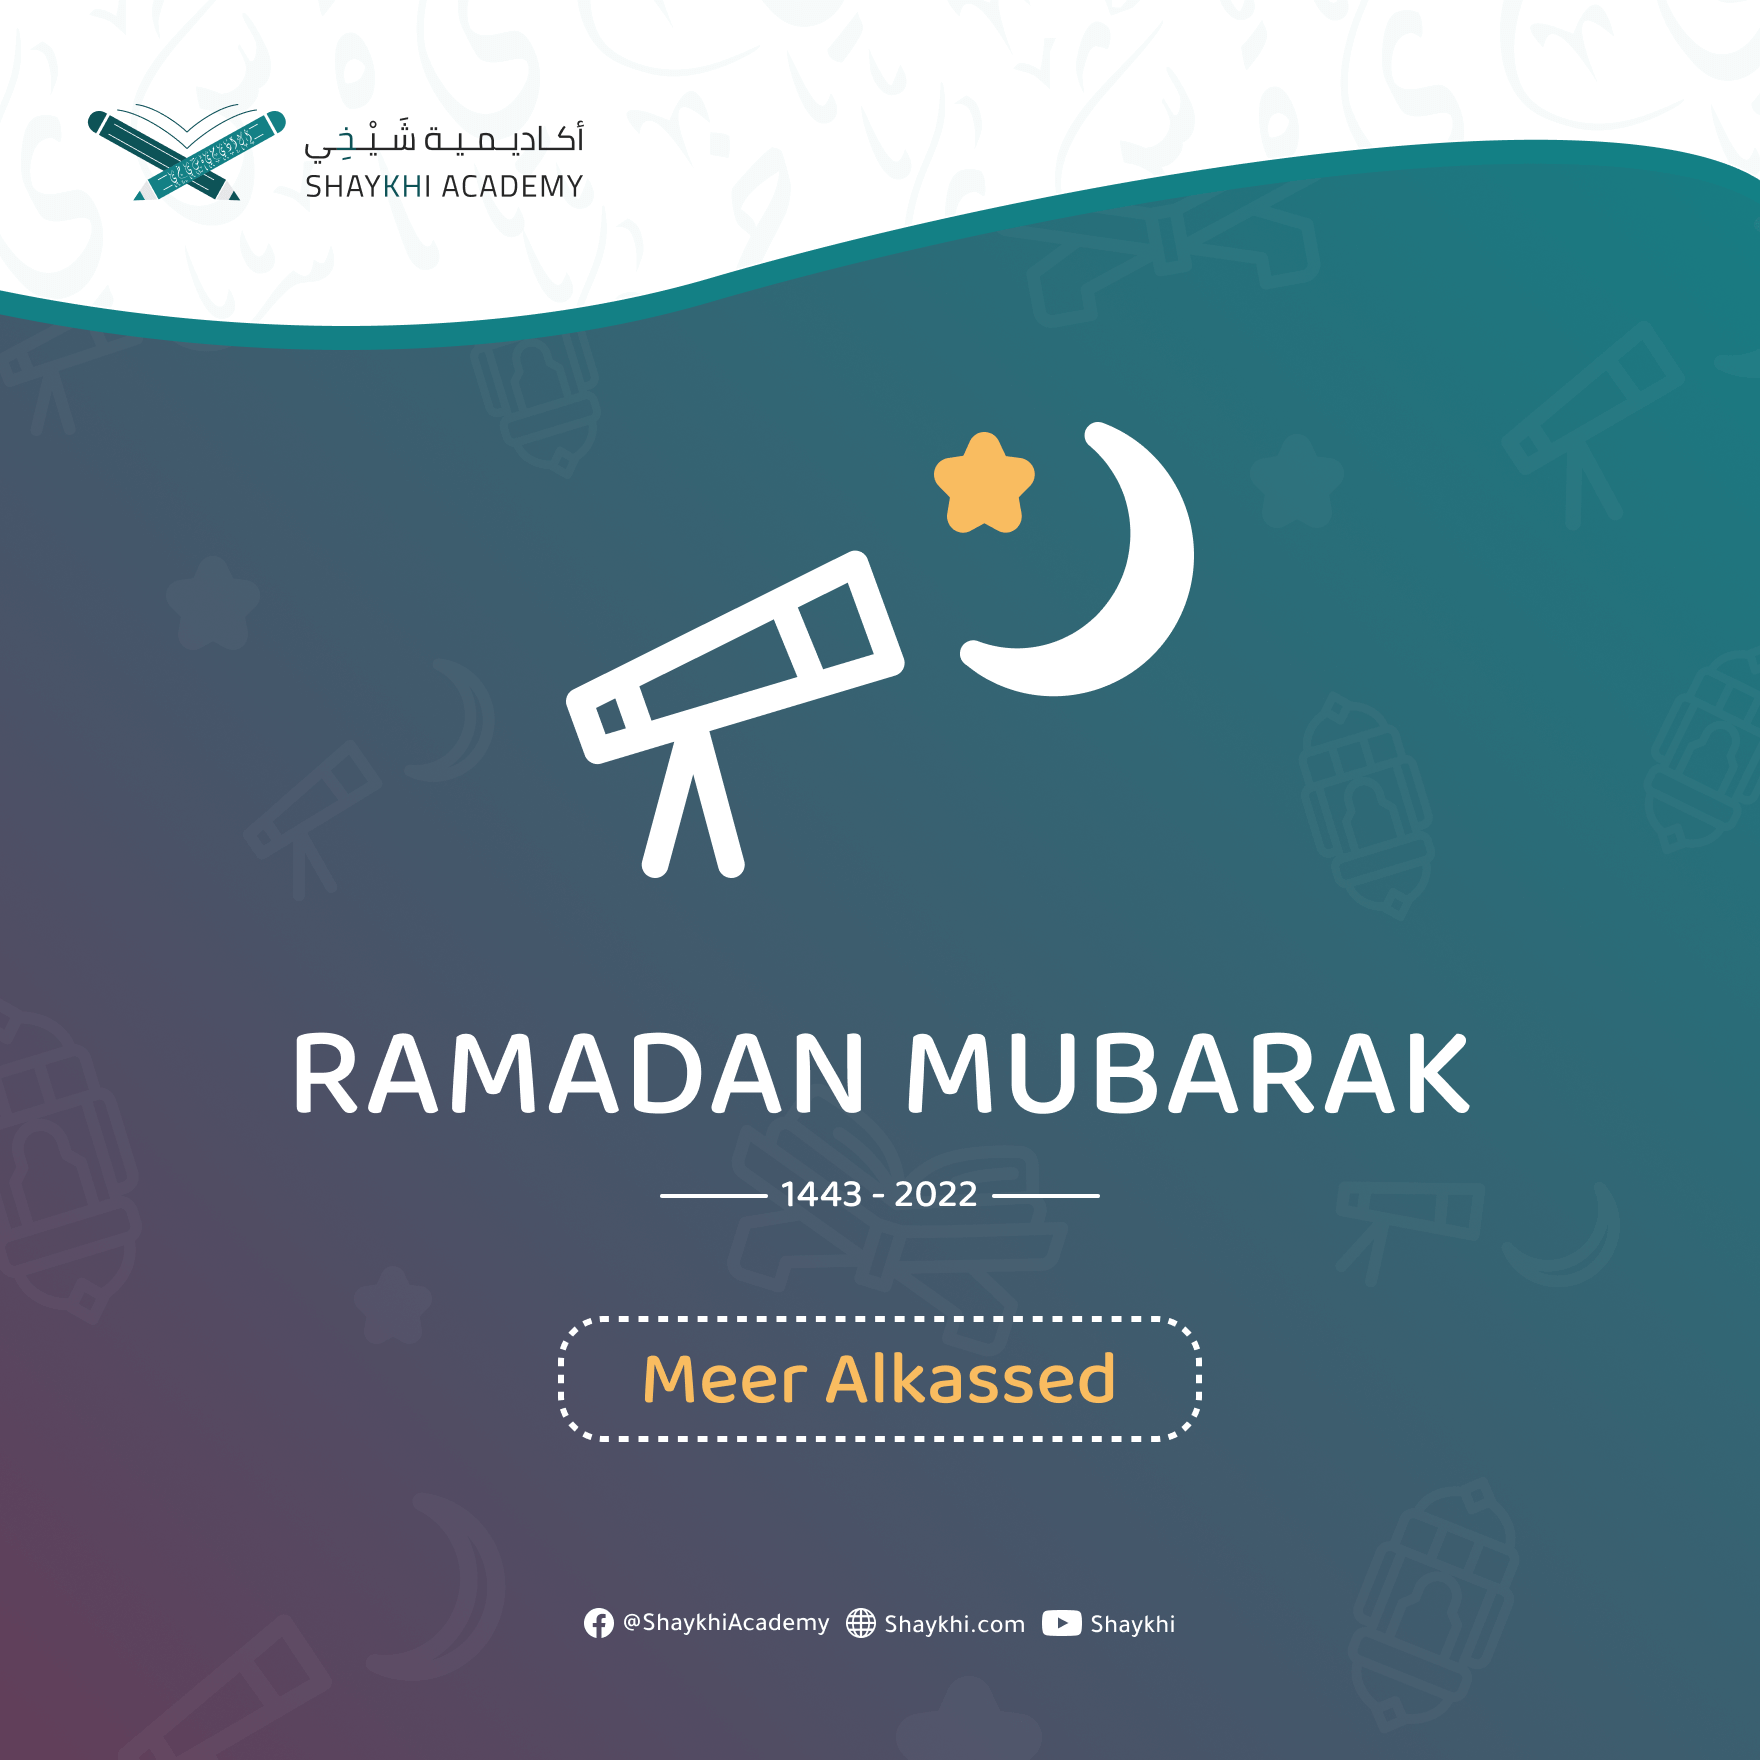 Ramadan Mubarak Images and Meaning - cards for Quran Students 12 Kids and teenagers